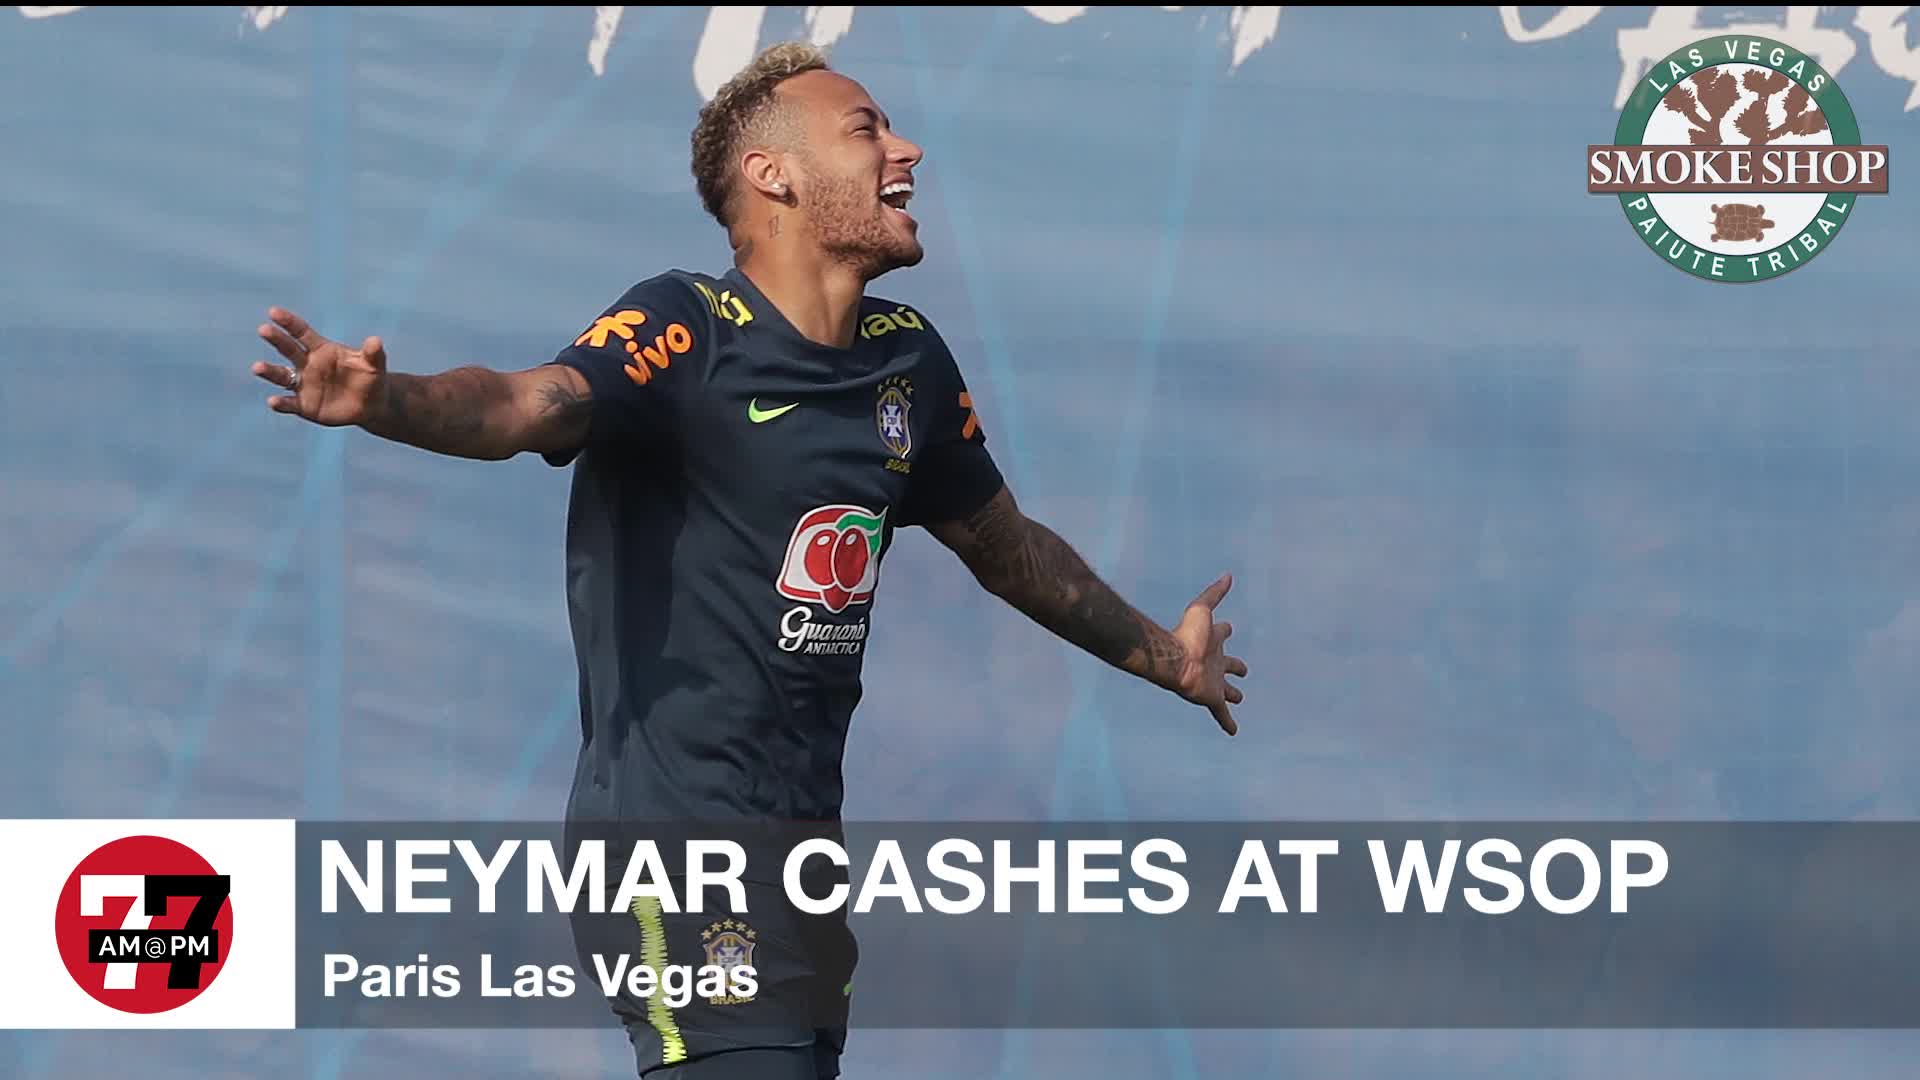 Soccer Superstar Neymar cashes out during World Series of Poker